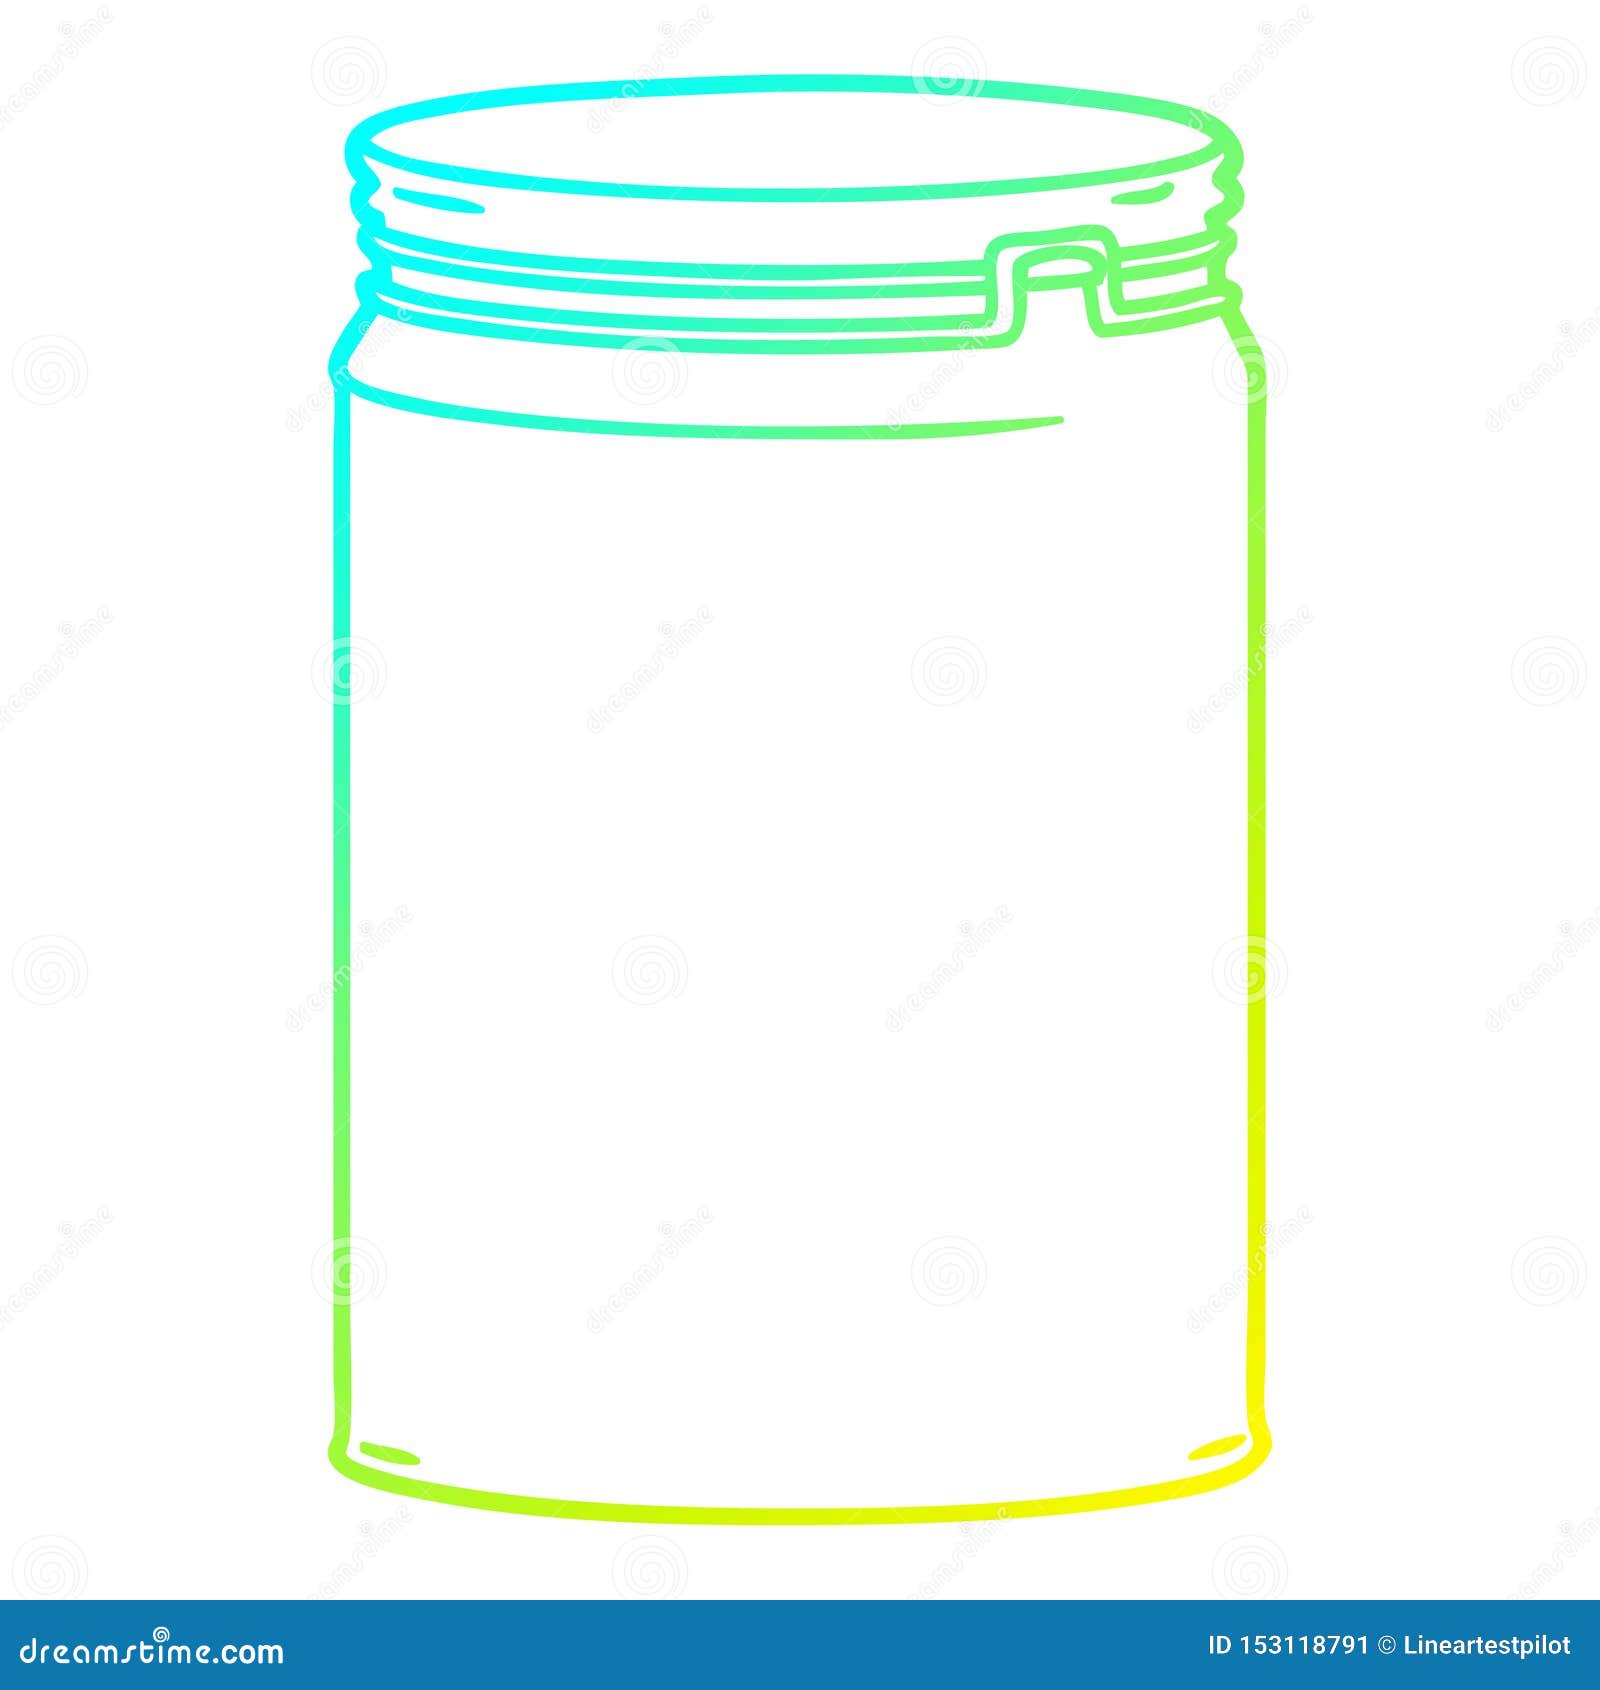 Download A Creative Cold Gradient Line Drawing Cartoon Empty Glass ...